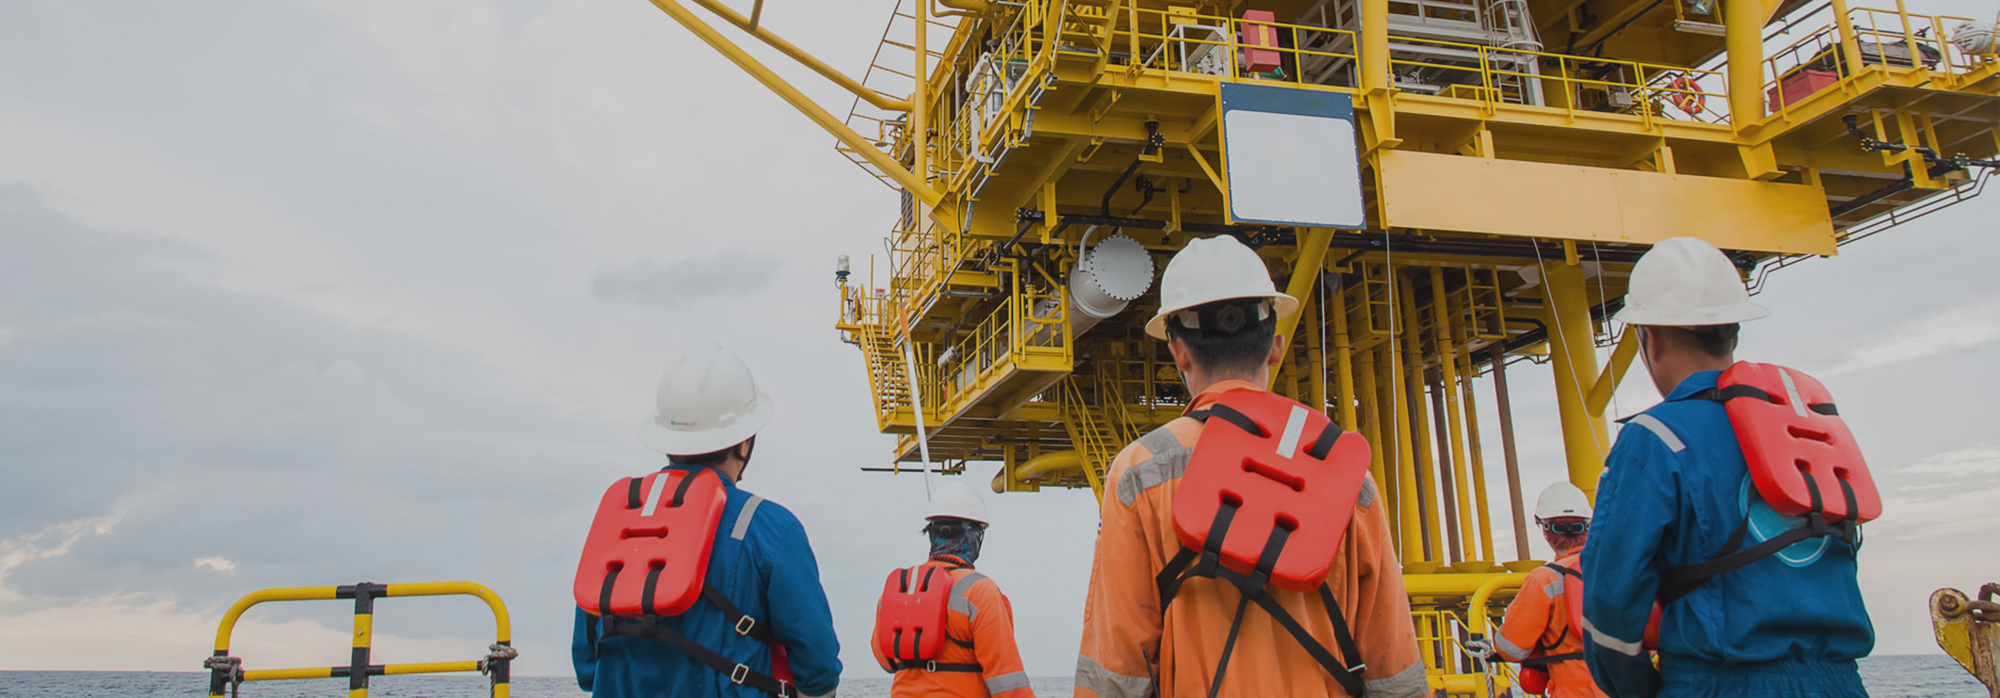  <h1>
                    Terra Petroleum <br> <span> leverages innovative technology and local knowledge to greatly reduce the risks of oil and gas exploration. </span> </h1> 